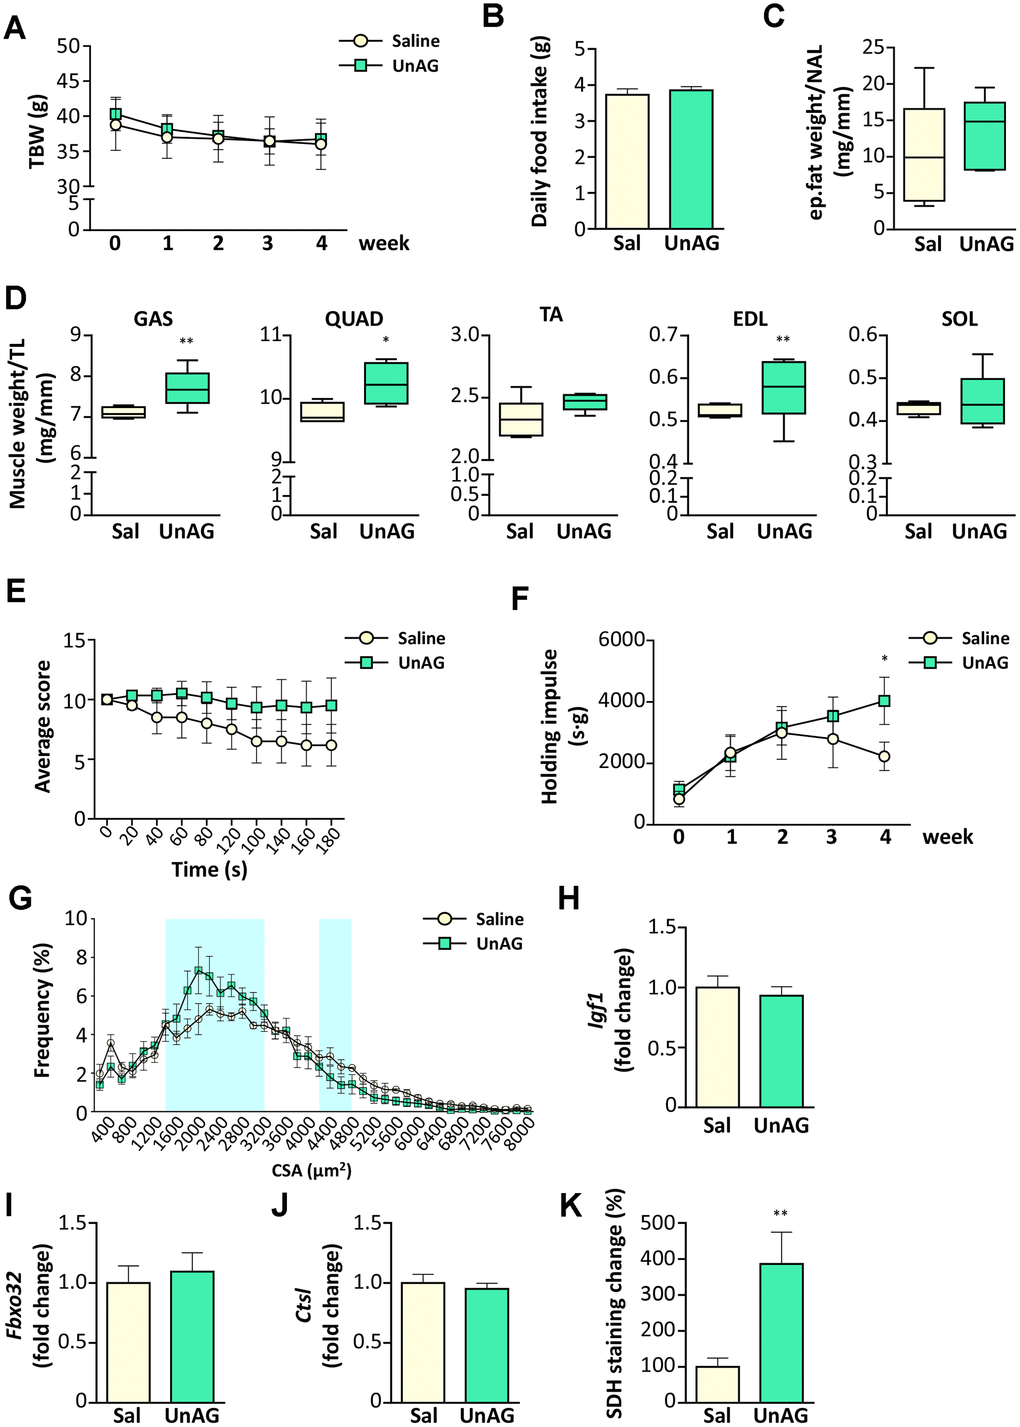 Exogenous administration of UnAG in old WT mice attenuates age-related muscle decline. UnAG 100 μg/Kg was injected daily i.p. for 28 days to 18-month-old mice (N = 6). Age- and weight-matched controls were injected with saline (N =6). (A) Total body weight; (B) daily food intake; (C) change in epidydimal fat mass normalized to nose-to-anus length (NAL) and in (D) muscle mass normalized to the tibial length (TL). GAS: gastrocnemius, SOL: soleus, QUAD: quadriceps, TA: tibialis anterior, EDL: extensor digitorum longus. (E) Average score trend in hanging wire test and (F) average holding impulse. (G) Cross-sectional area (CSA) frequency distribution of myofibers in GAS. The shadowed areas of the graph represent the sections of statistically significant differences among curves. (H) IGF-1 (Igf1), (I) Atrogin-1 (Fbxo32), and (J) Cathepsin-L (Ctsl) expression in gastrocnemius determined by real-time RT-PCR. (K) Quantification of SDH staining in TA muscle presented as the percentage of SDH-positive area above the total muscle surface. Data in bar graph are presented as mean ± SEM. For box plots, the lower and up boundaries denote the 25th and the 75th percentile of each data set, respectively, the horizontal line represents the median, and the whiskers represent the min and max of values. *p